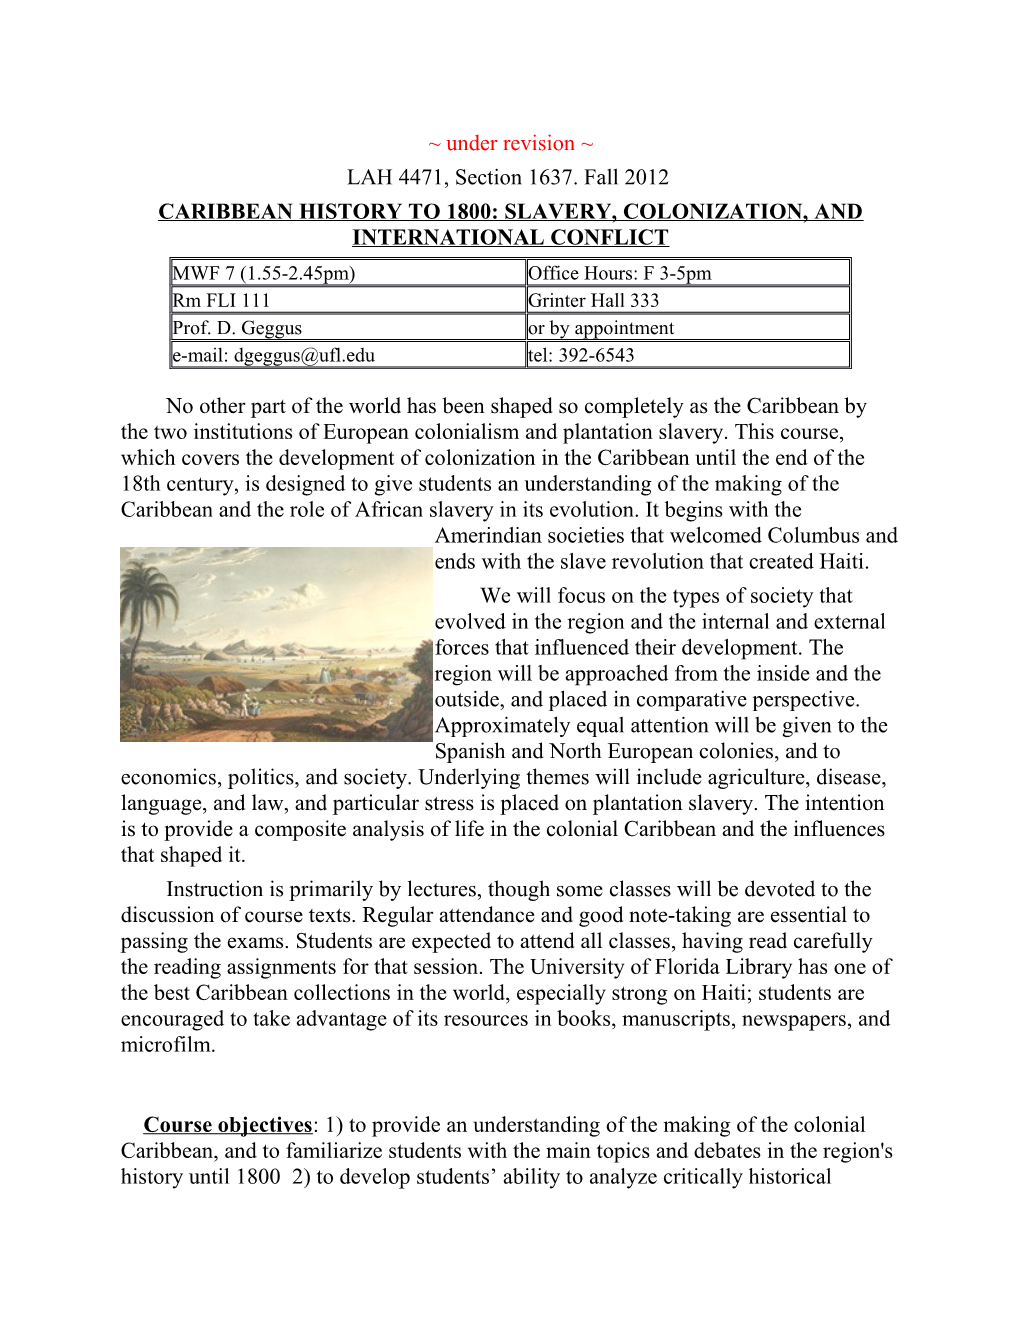 Caribbean History to 1800: Slavery, Colonization, and International Conflict